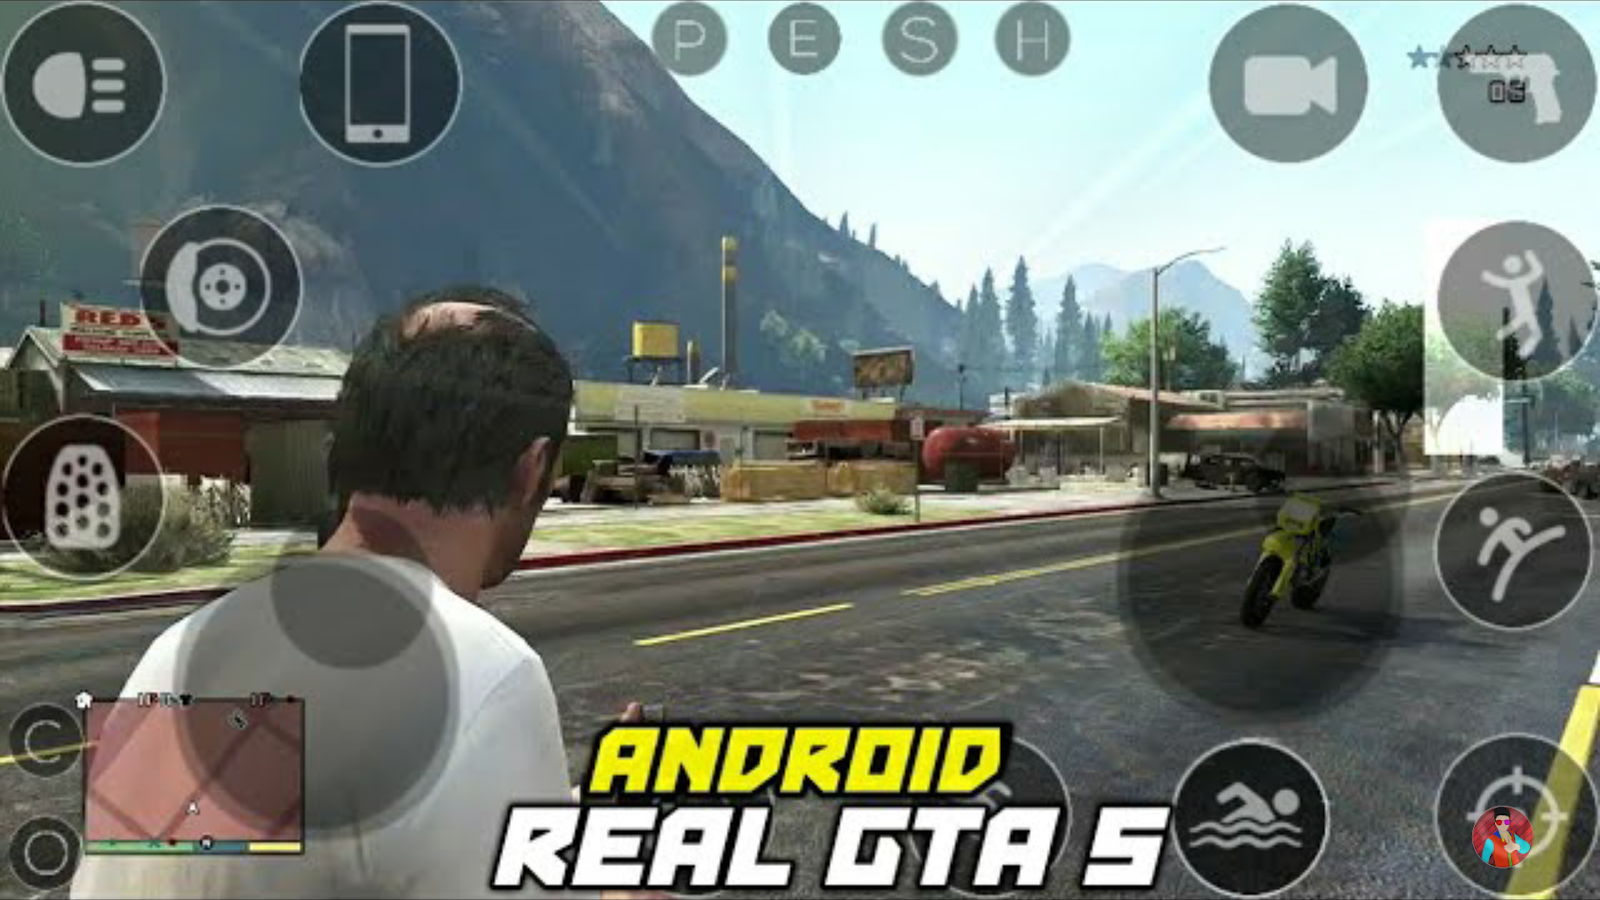 Download real gta 5 for android фото 33